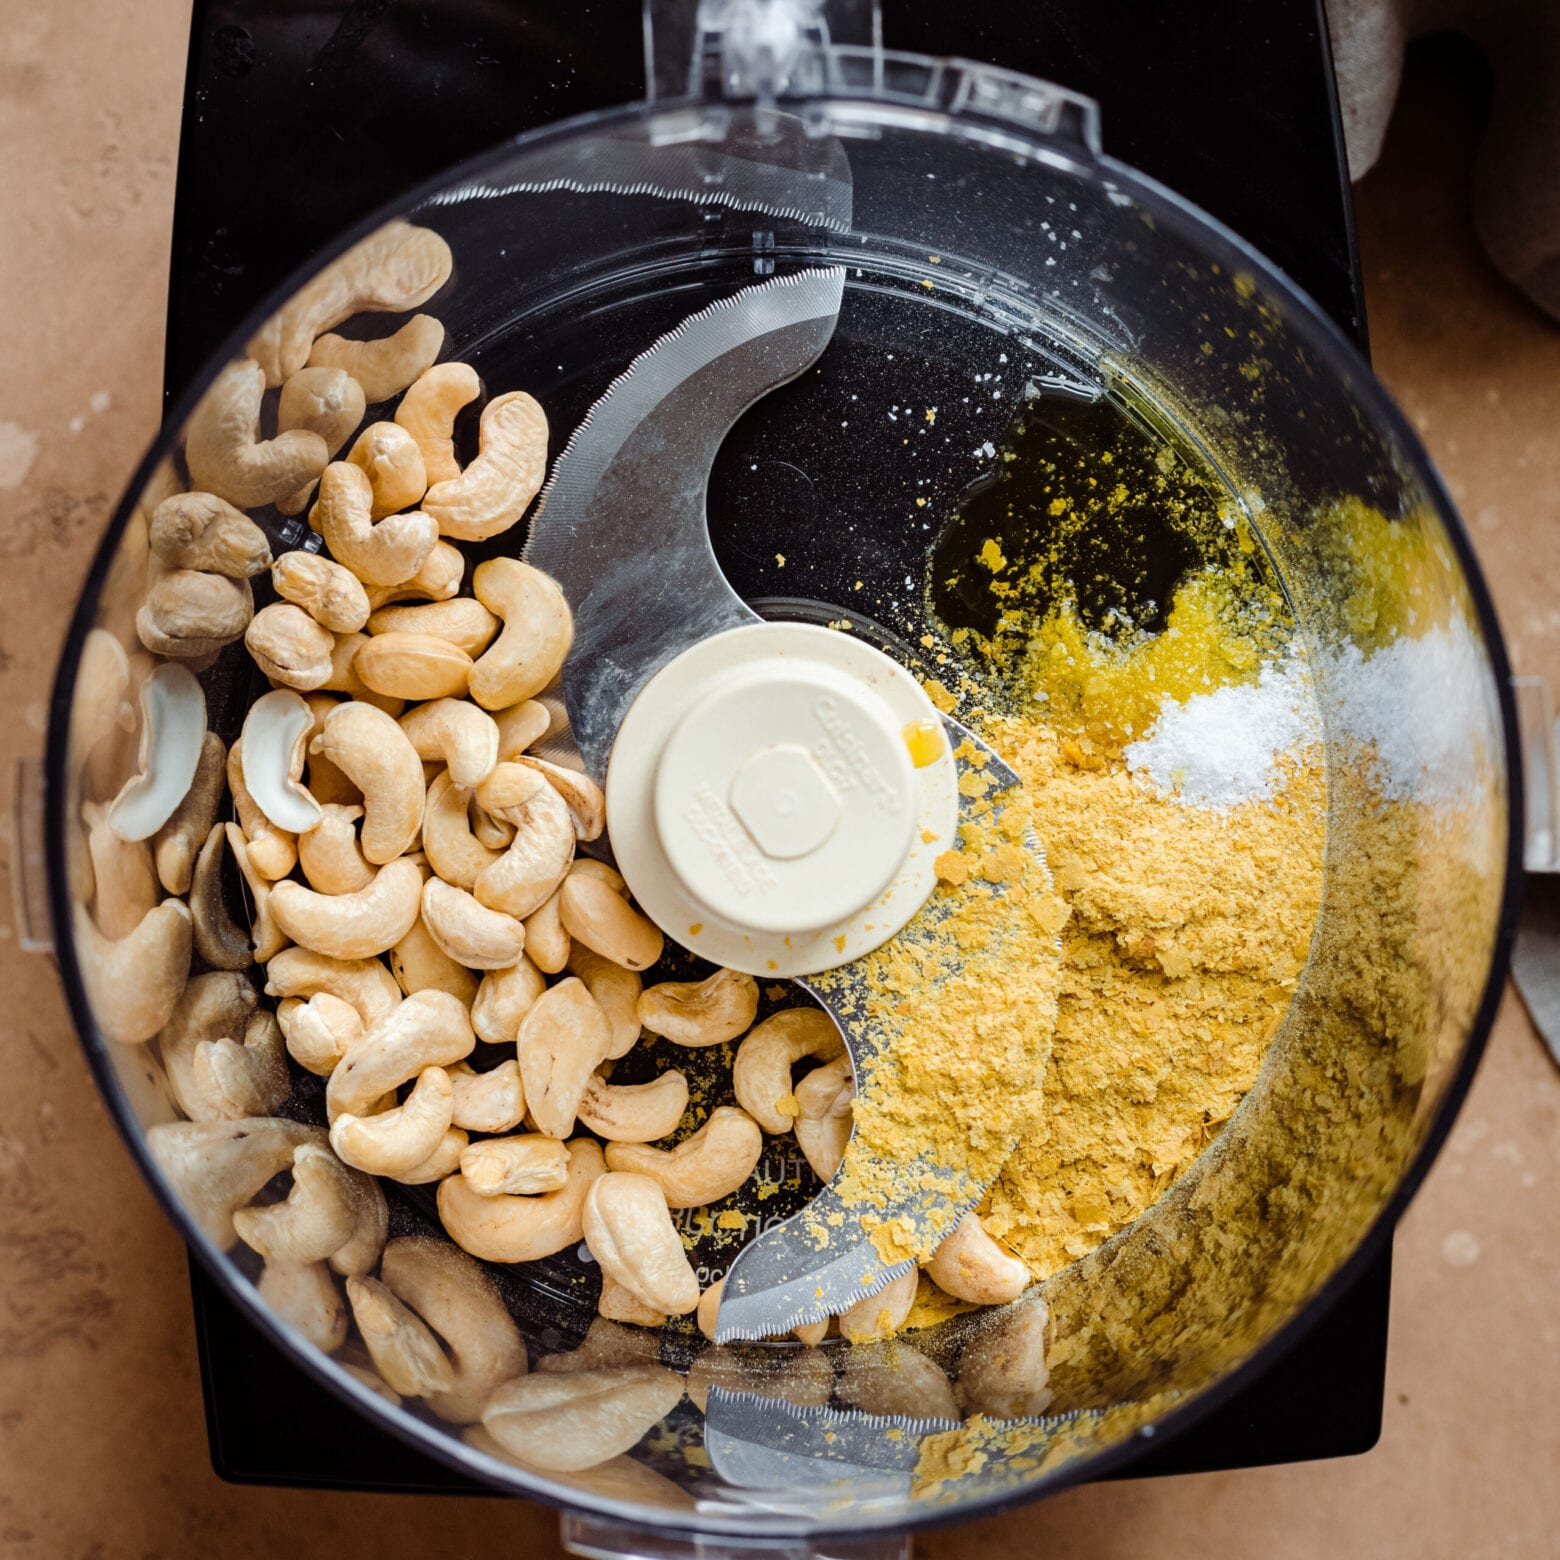 cashews and nutritional yeast in food processor for cashew parmesan.